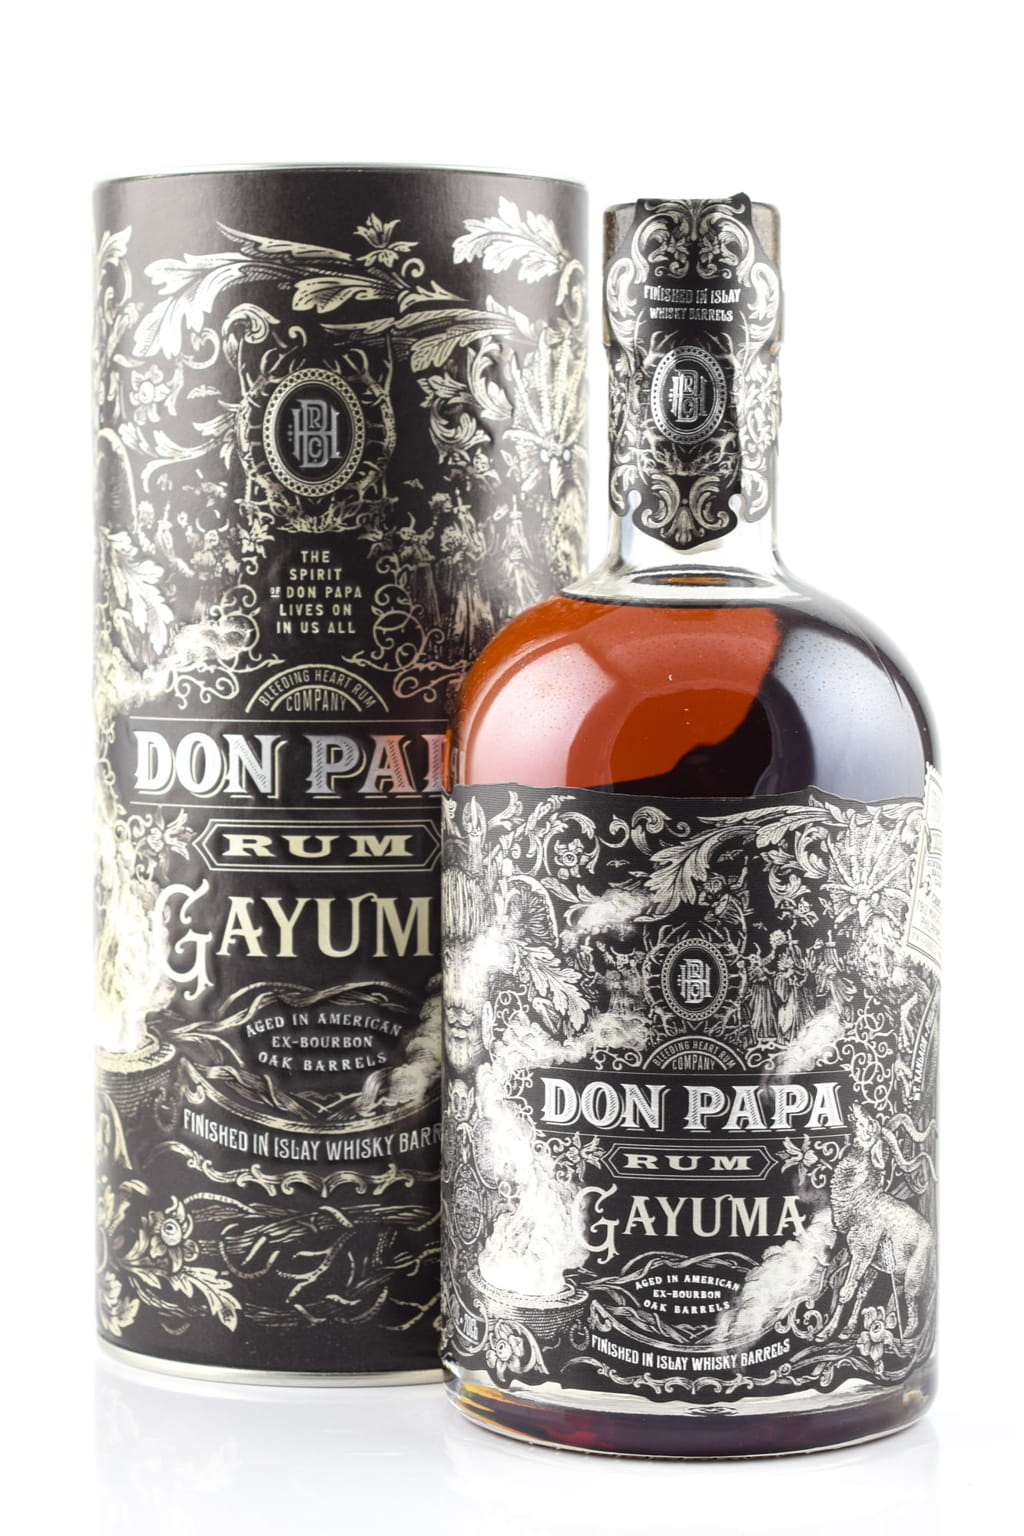 ᐅ Don Papa Gayuma Malts | - the buy special online of Home edition - now